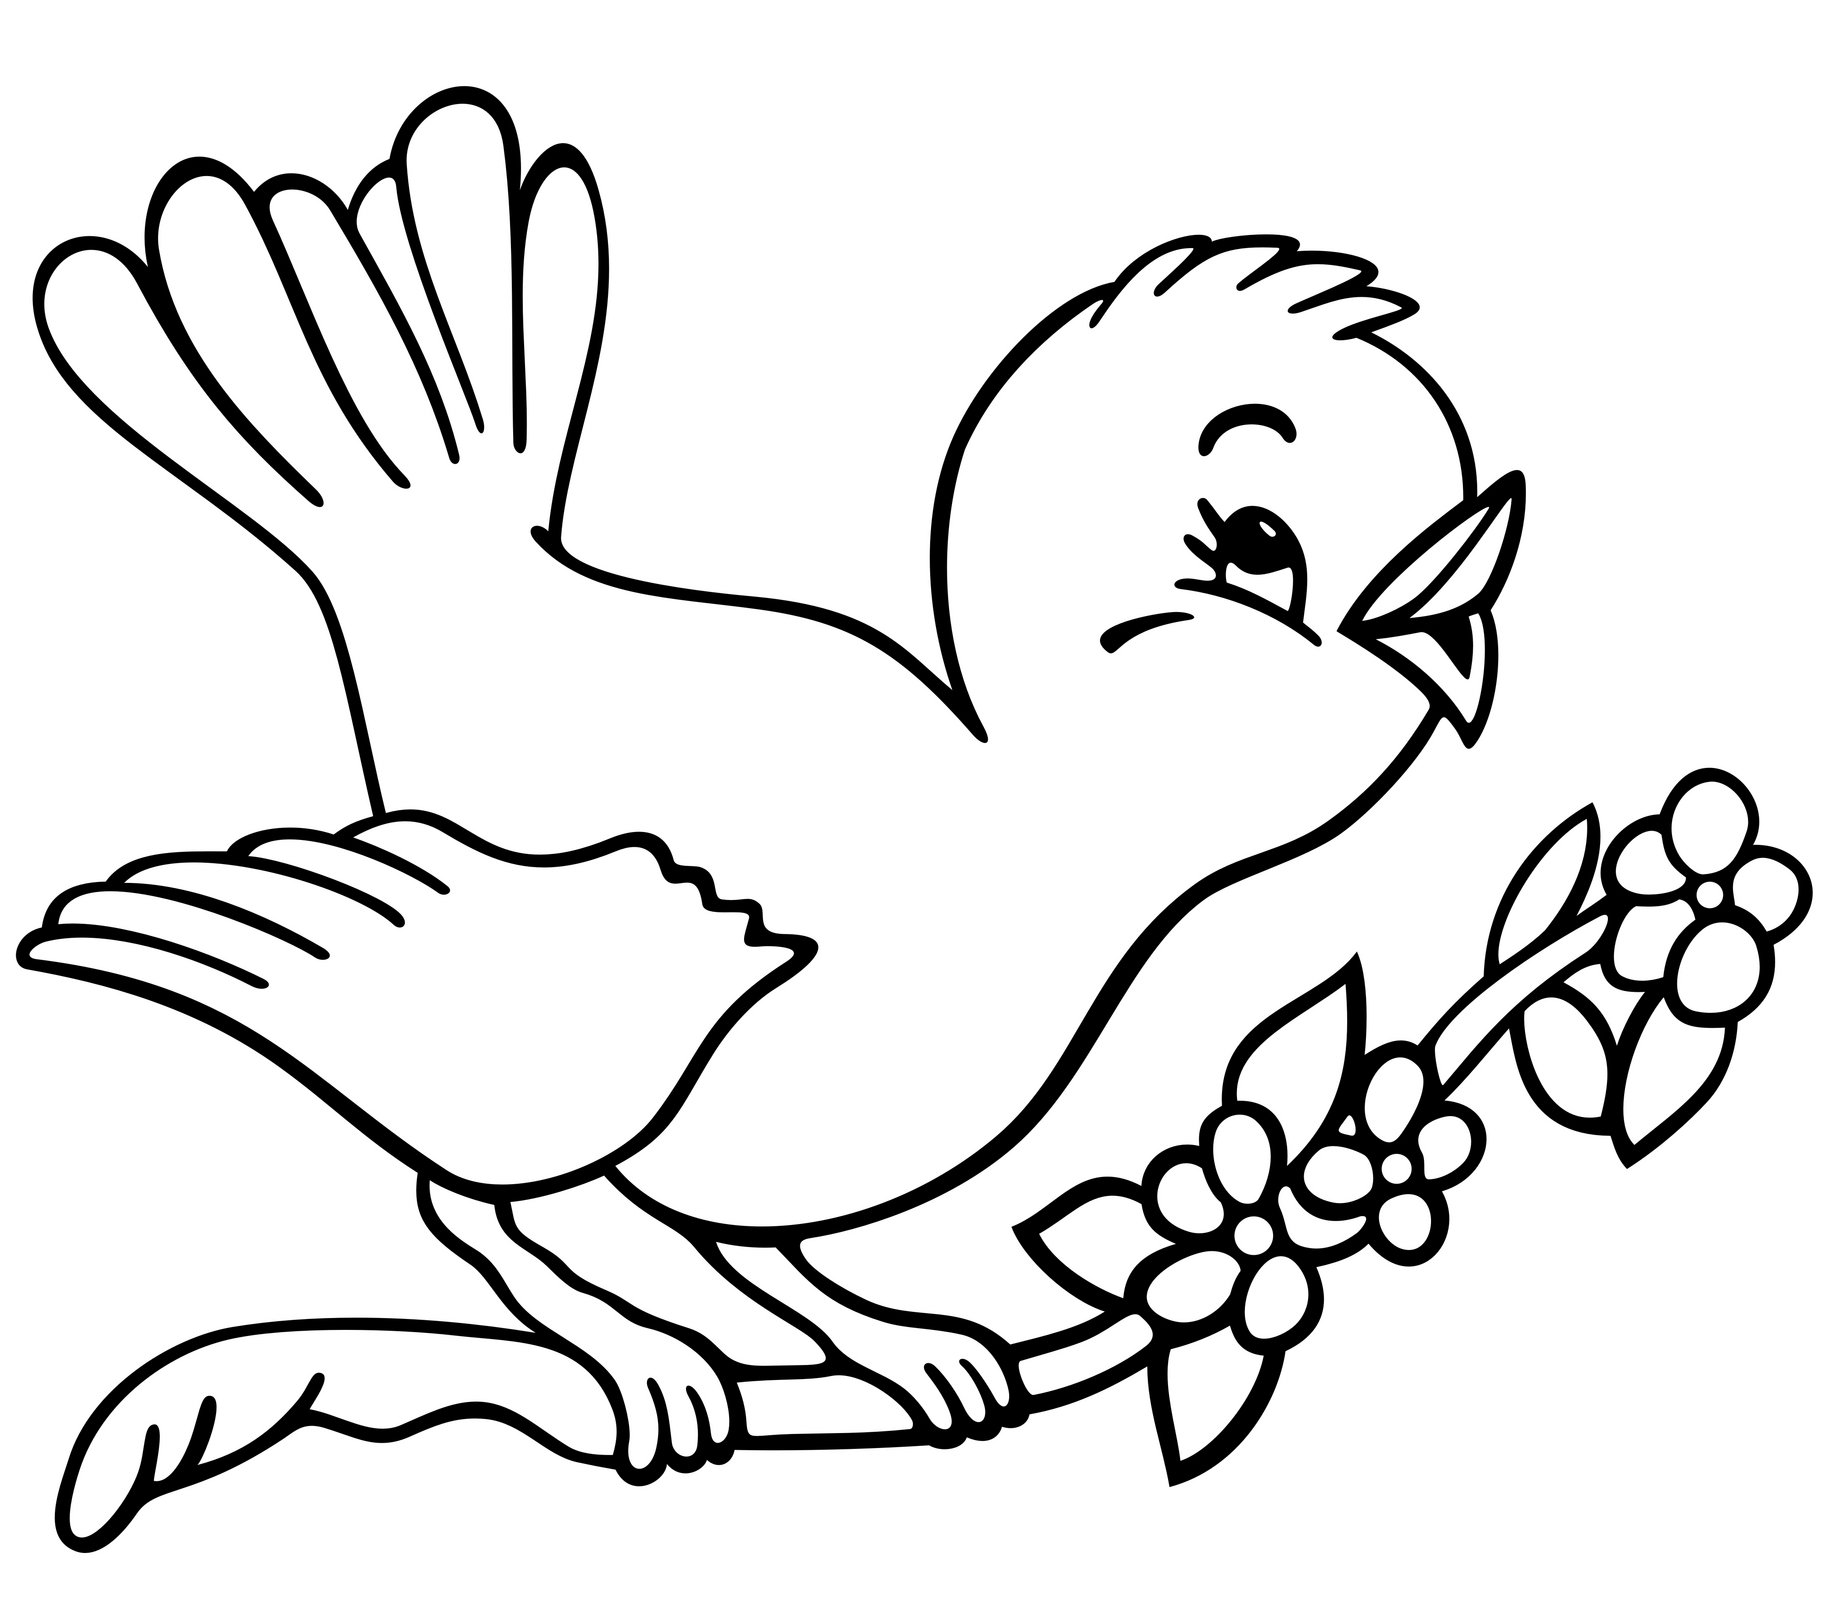 Bird Drawings For Kids   ClipArt Best